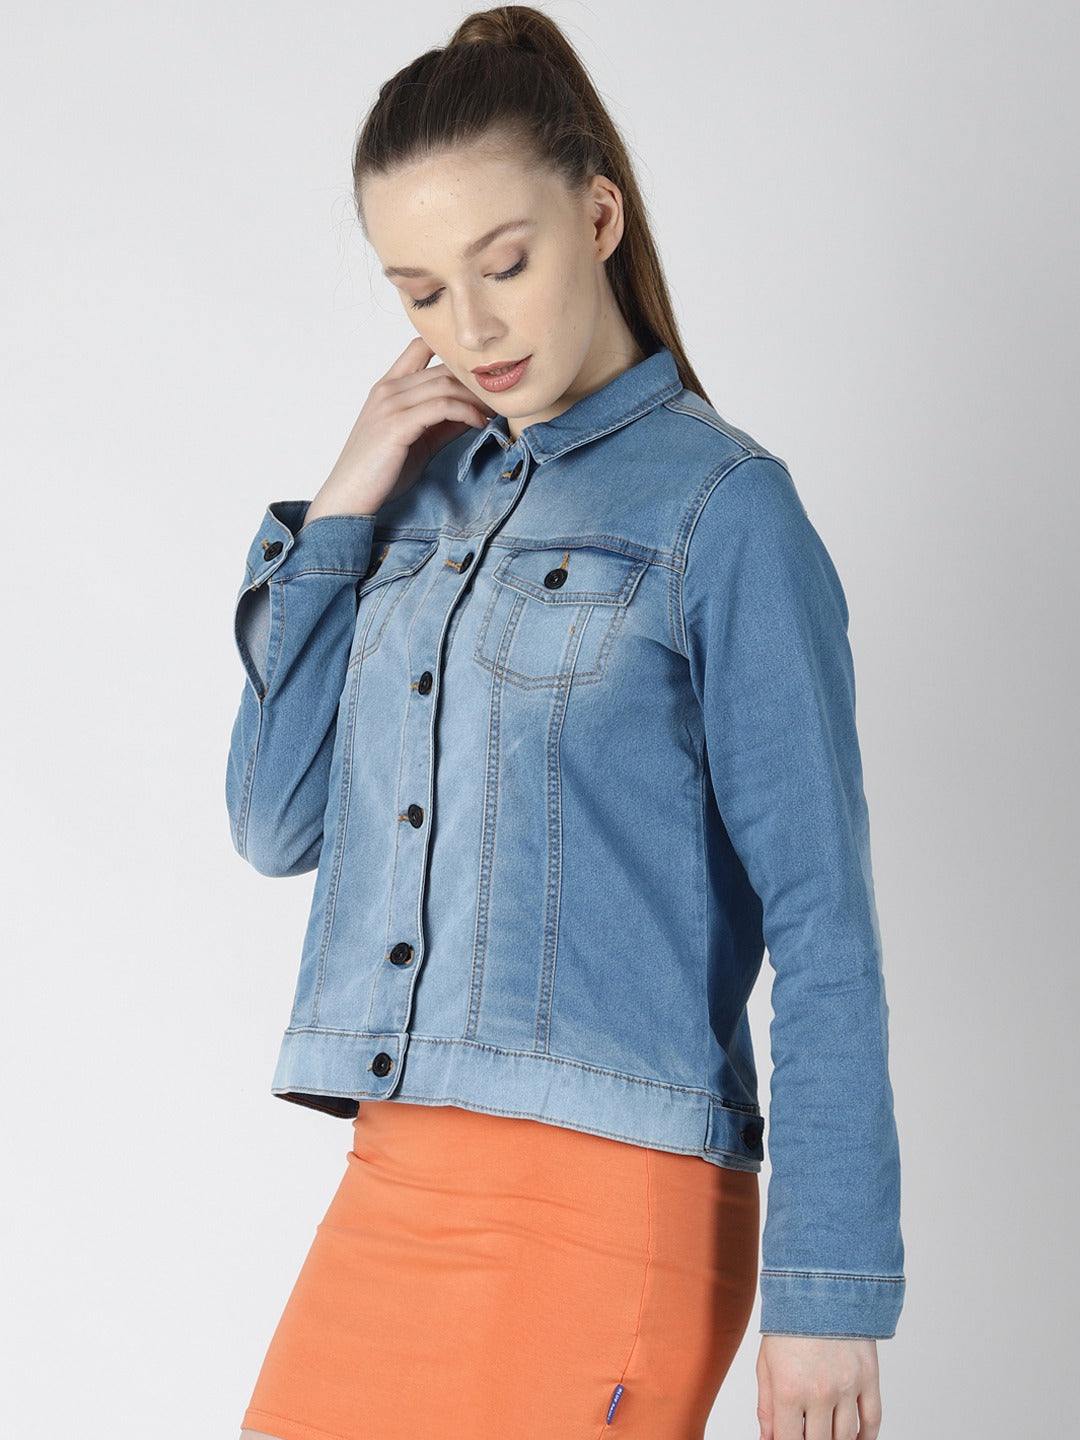 Blue denim jacket for stylish women, features button closure and long sleeves.